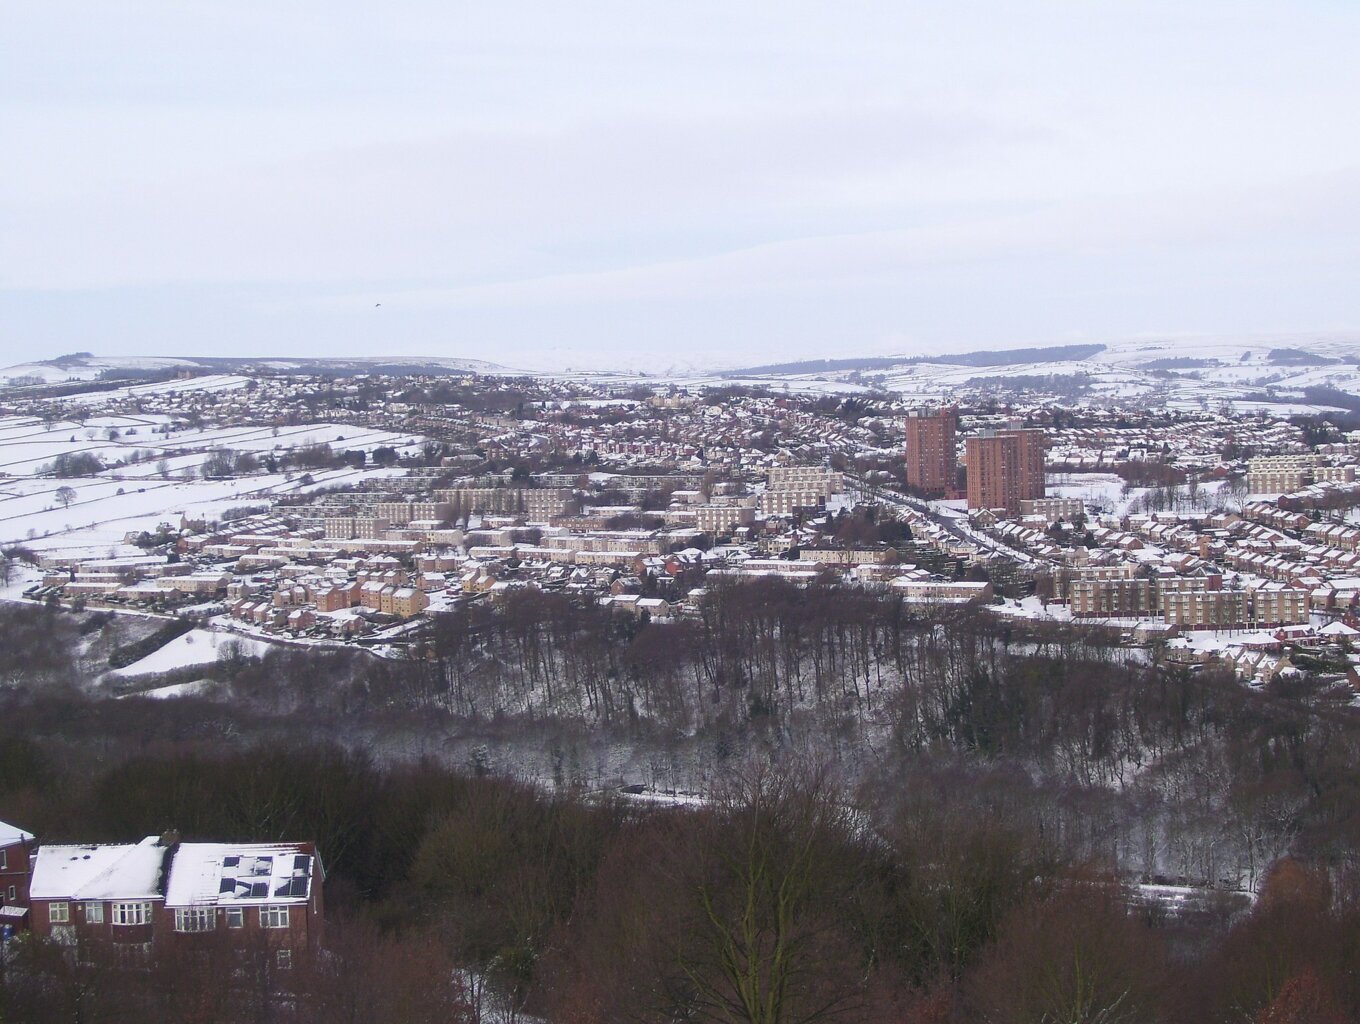 A view of distant houses with a coating of snow